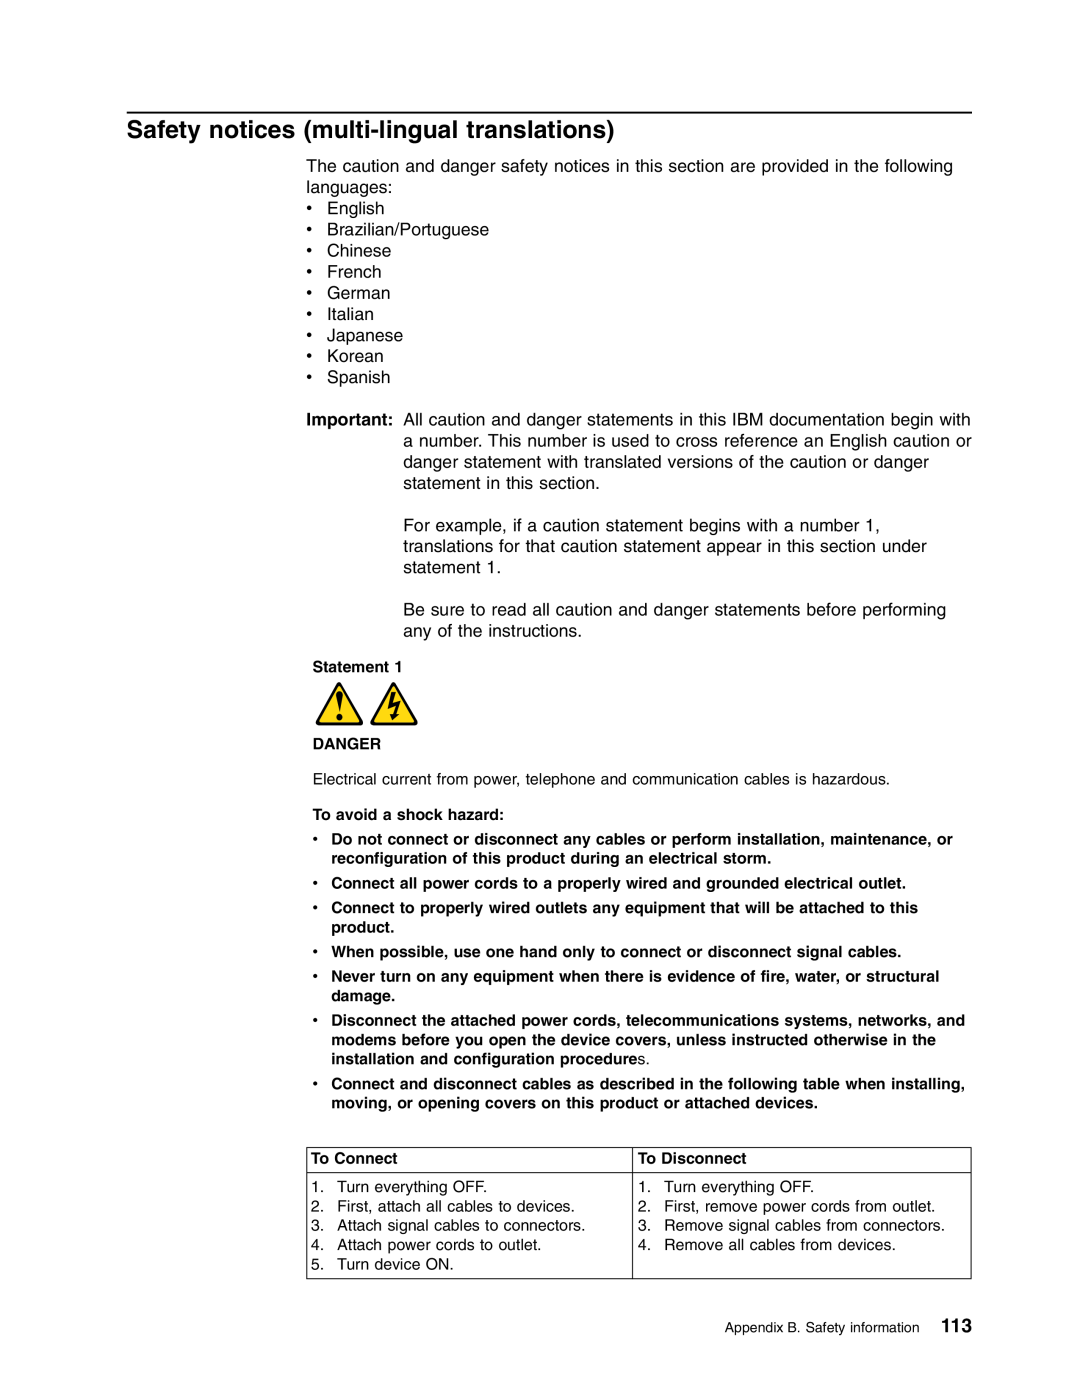 IBM HS40 manual Safety notices multi-lingual translations 